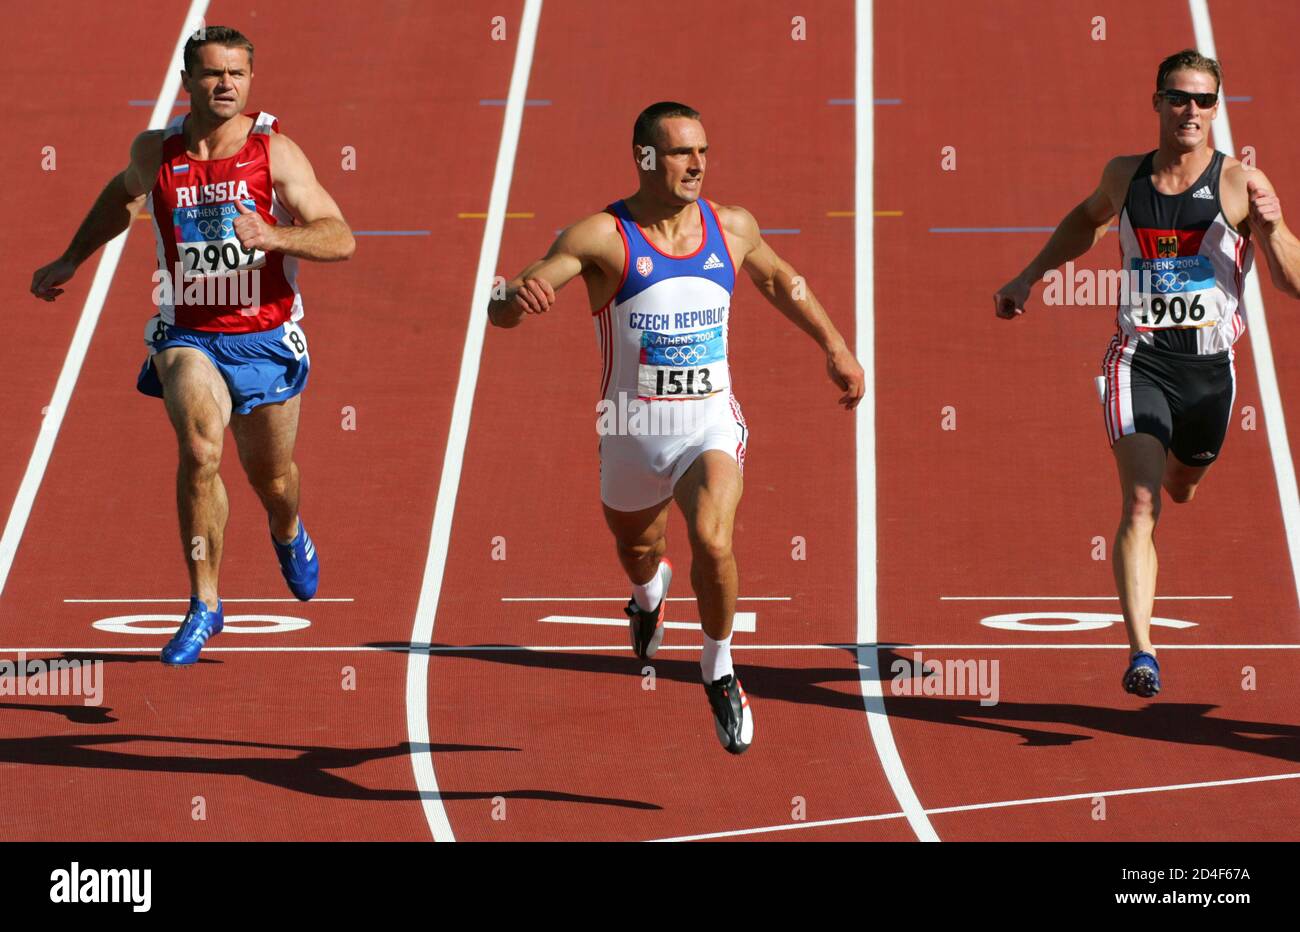 Athletes cross the finish line in men's 100 metres event of the decathlon  at the Athens 2004 Olympic Games. Athletes (L-R) Russia's Lev Lobodin,  Czech Republic's Roman Sebrle and Germany's Dennis Leyckes